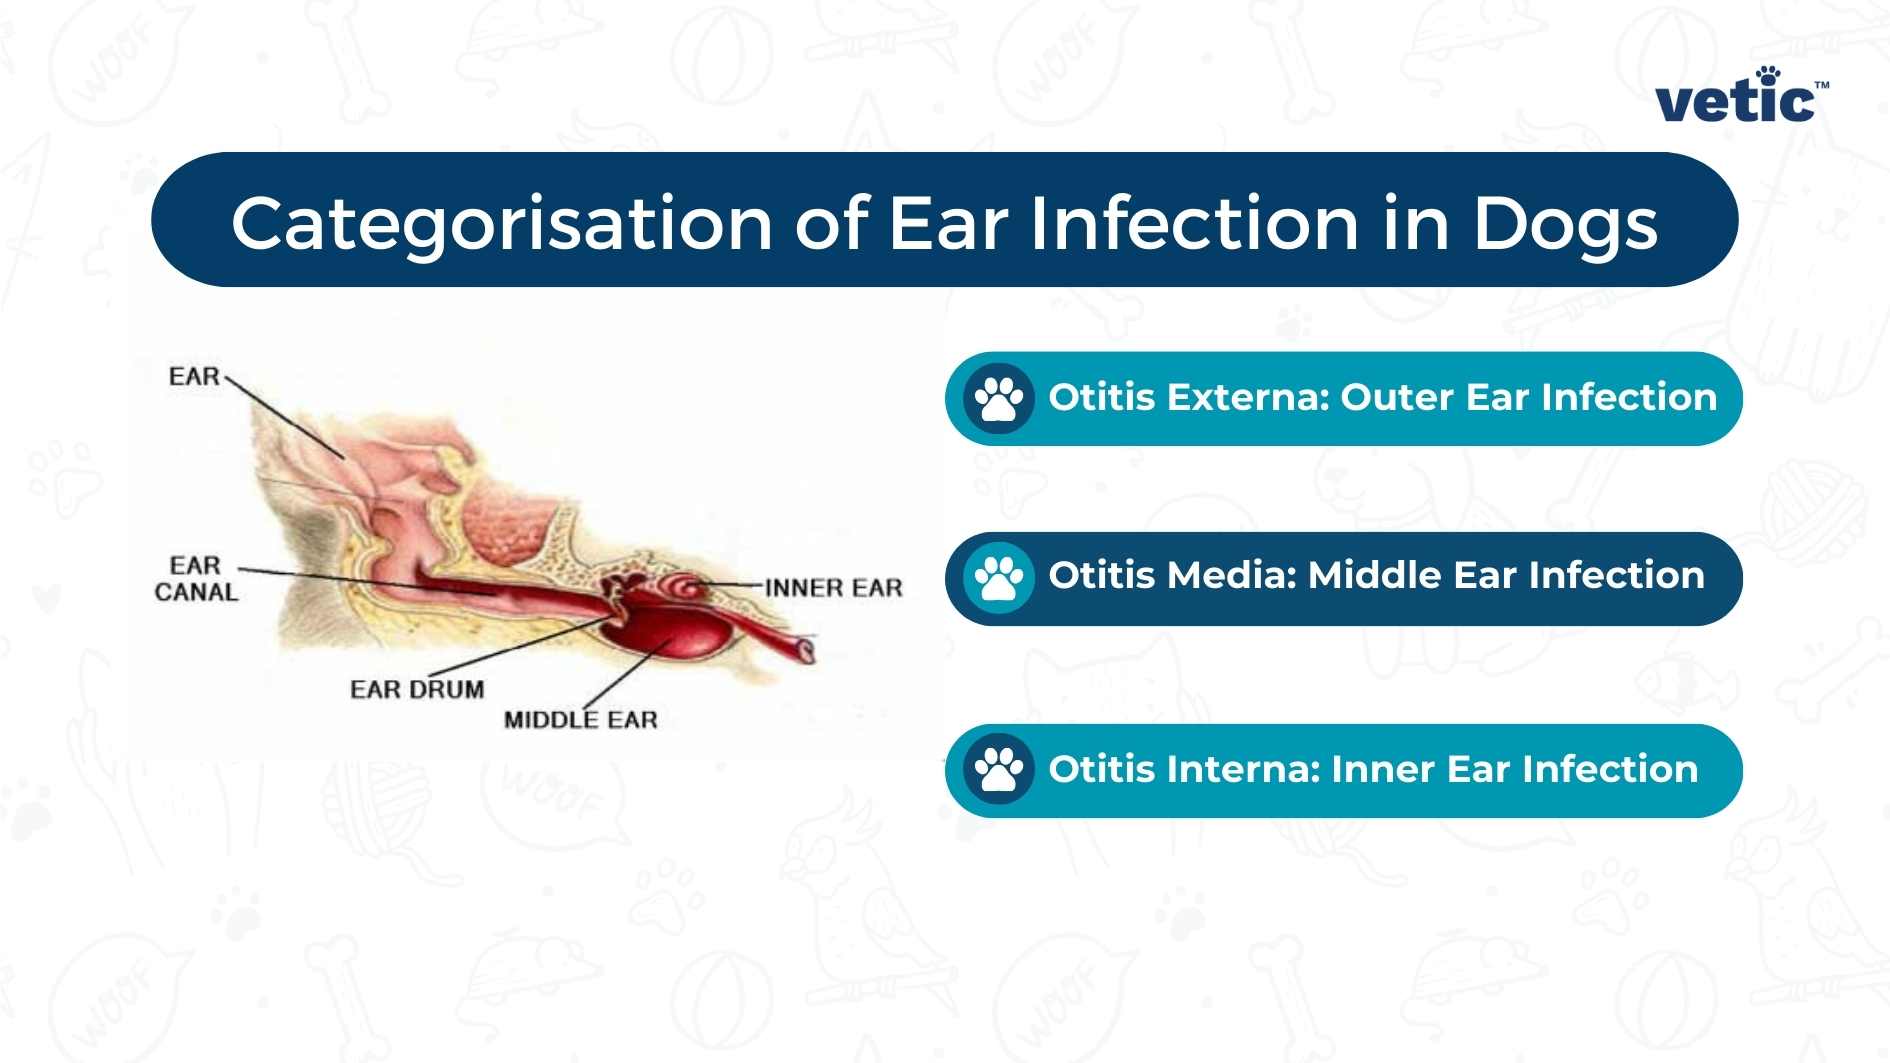 image by vetic™ illustrating the OMR (Outer, Middle, Inner) categorization of ear infections in dogs, with a detailed diagram of a dog’s ear. Description: The image provides a visual explanation of the different types of ear infections that can affect dogs. It is presented by vetic™ and outlines three specific categories - Otitis Externa for outer ear infection, Otitis Media for middle ear infection, and Otitis Interna for inner ear infection. A labeled diagram of a dog’s ear highlights these three areas to offer a clear understanding.